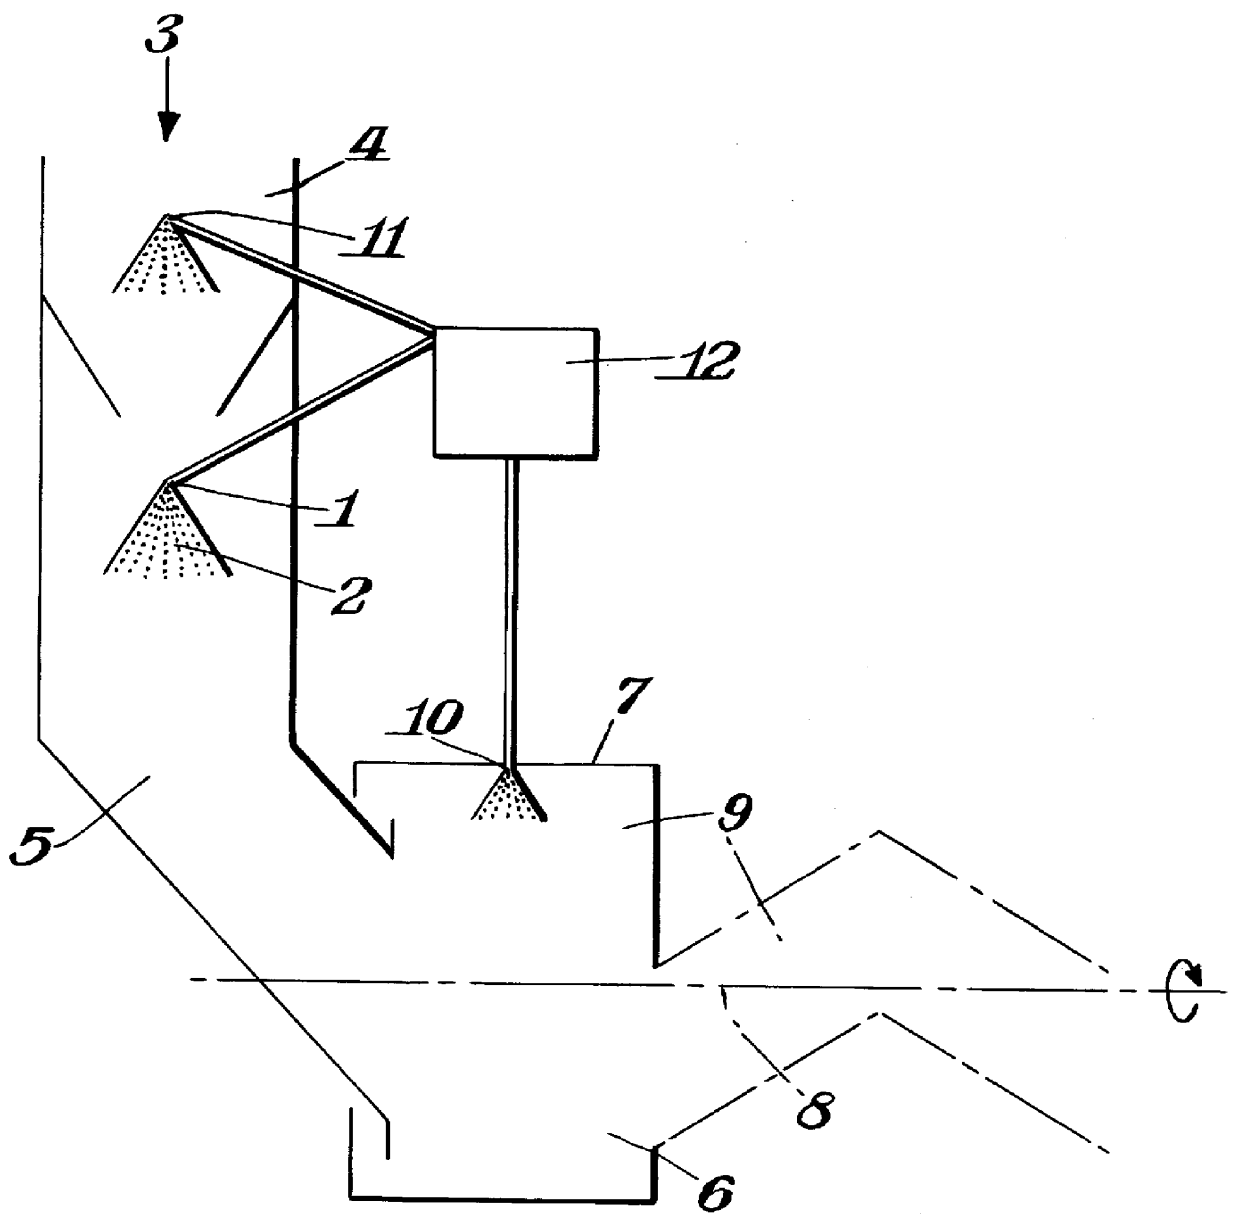 Apparatus for the uniform distribution of a small amount of liquid on bulk materials